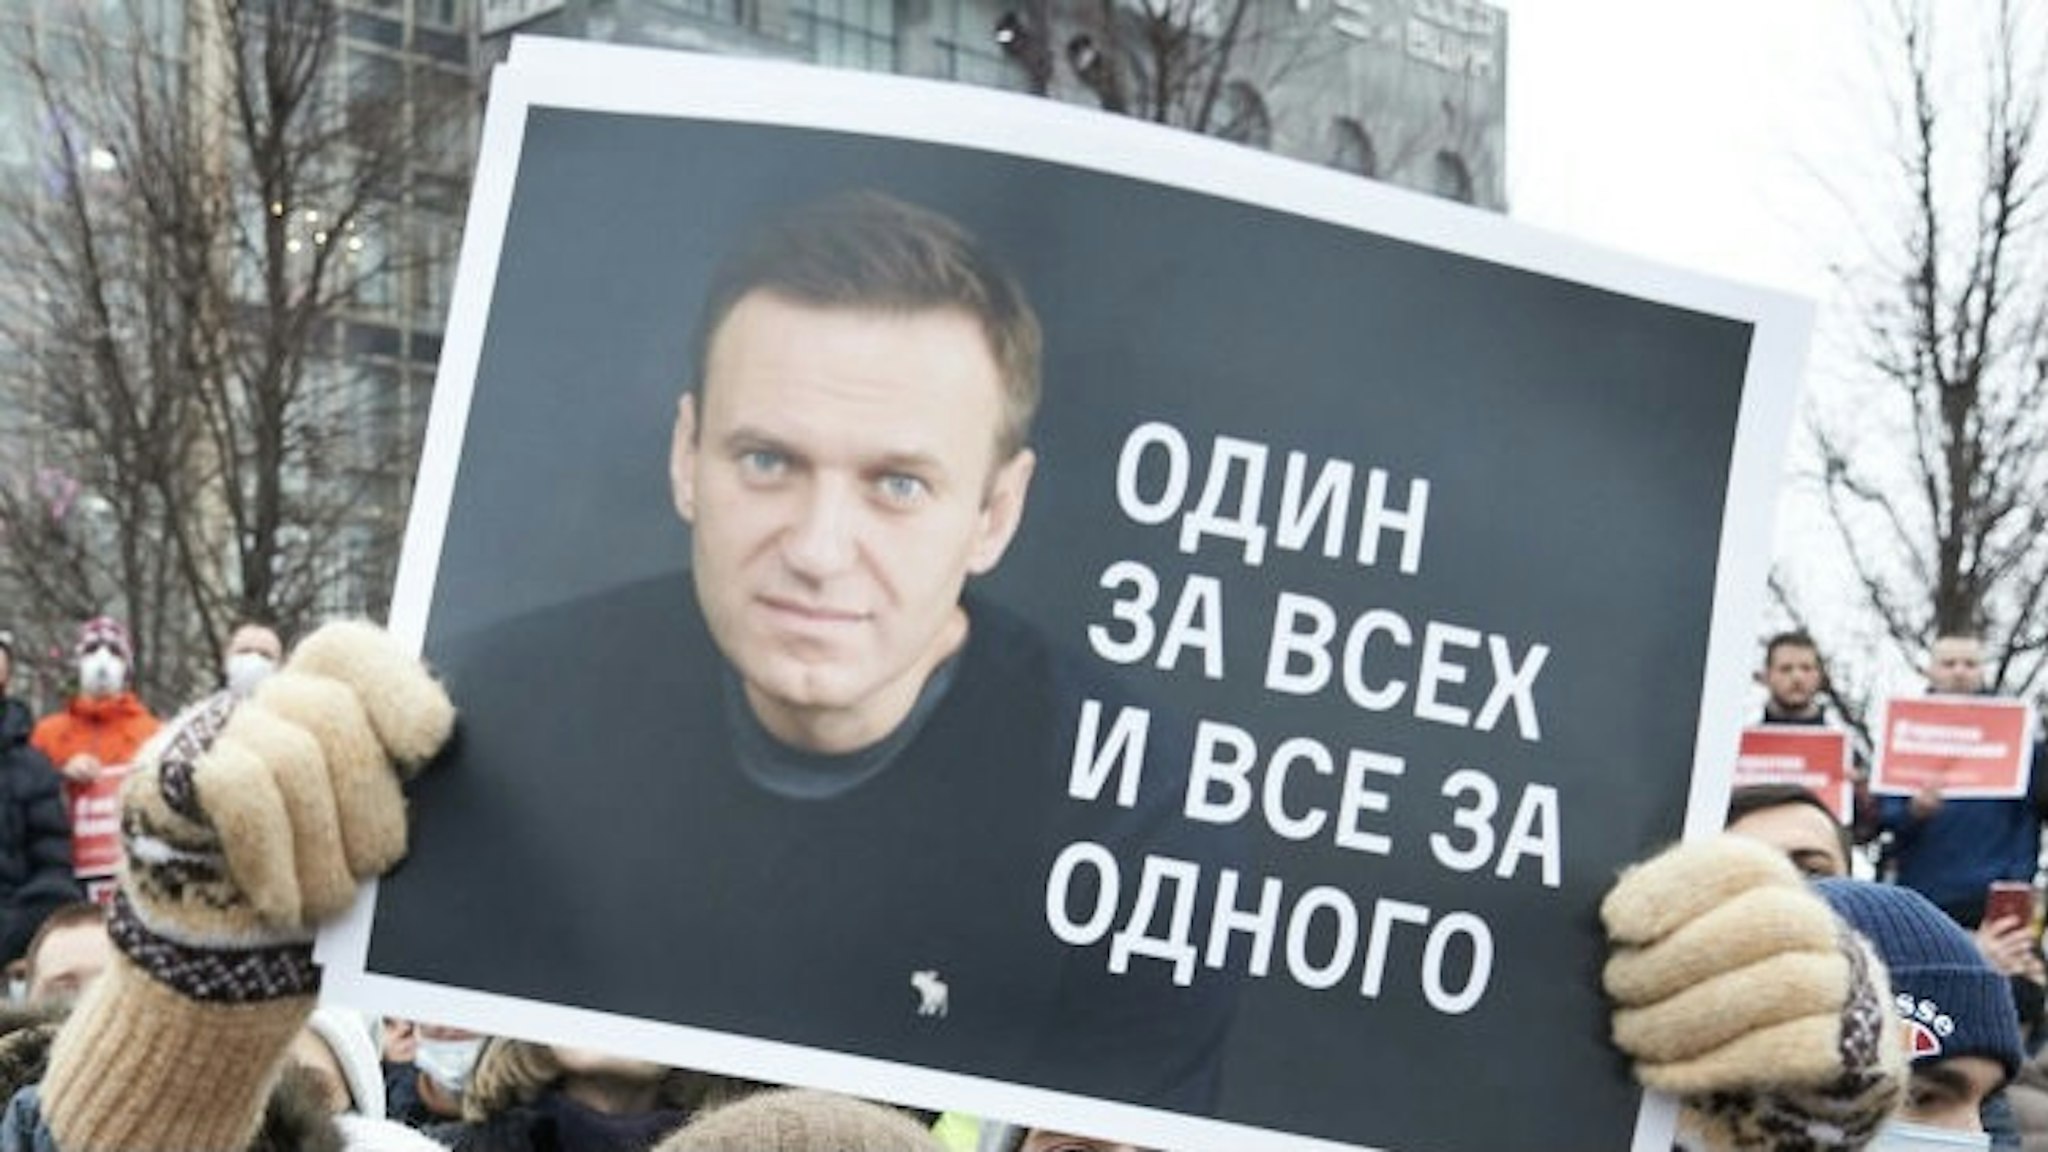 MOSCOW, RUSSIA - JANUARY 23: A woman holding up a placard reading "Navalny is not afraid and I'm not afraid" attends a rally in support of jailed opposition leader Alexei Navalny on January 23, 2021 in Moscow, Russia. Earlier this week, Kremlin-critic Alexei Navalny called for supporters to protest after he was remanded to pre-trial detention for 30 days. His arrest came one day after his return to Russia, following his poisoning with a nerve agent last summer. (Photo by Oleg Nikishin/Getty Images)